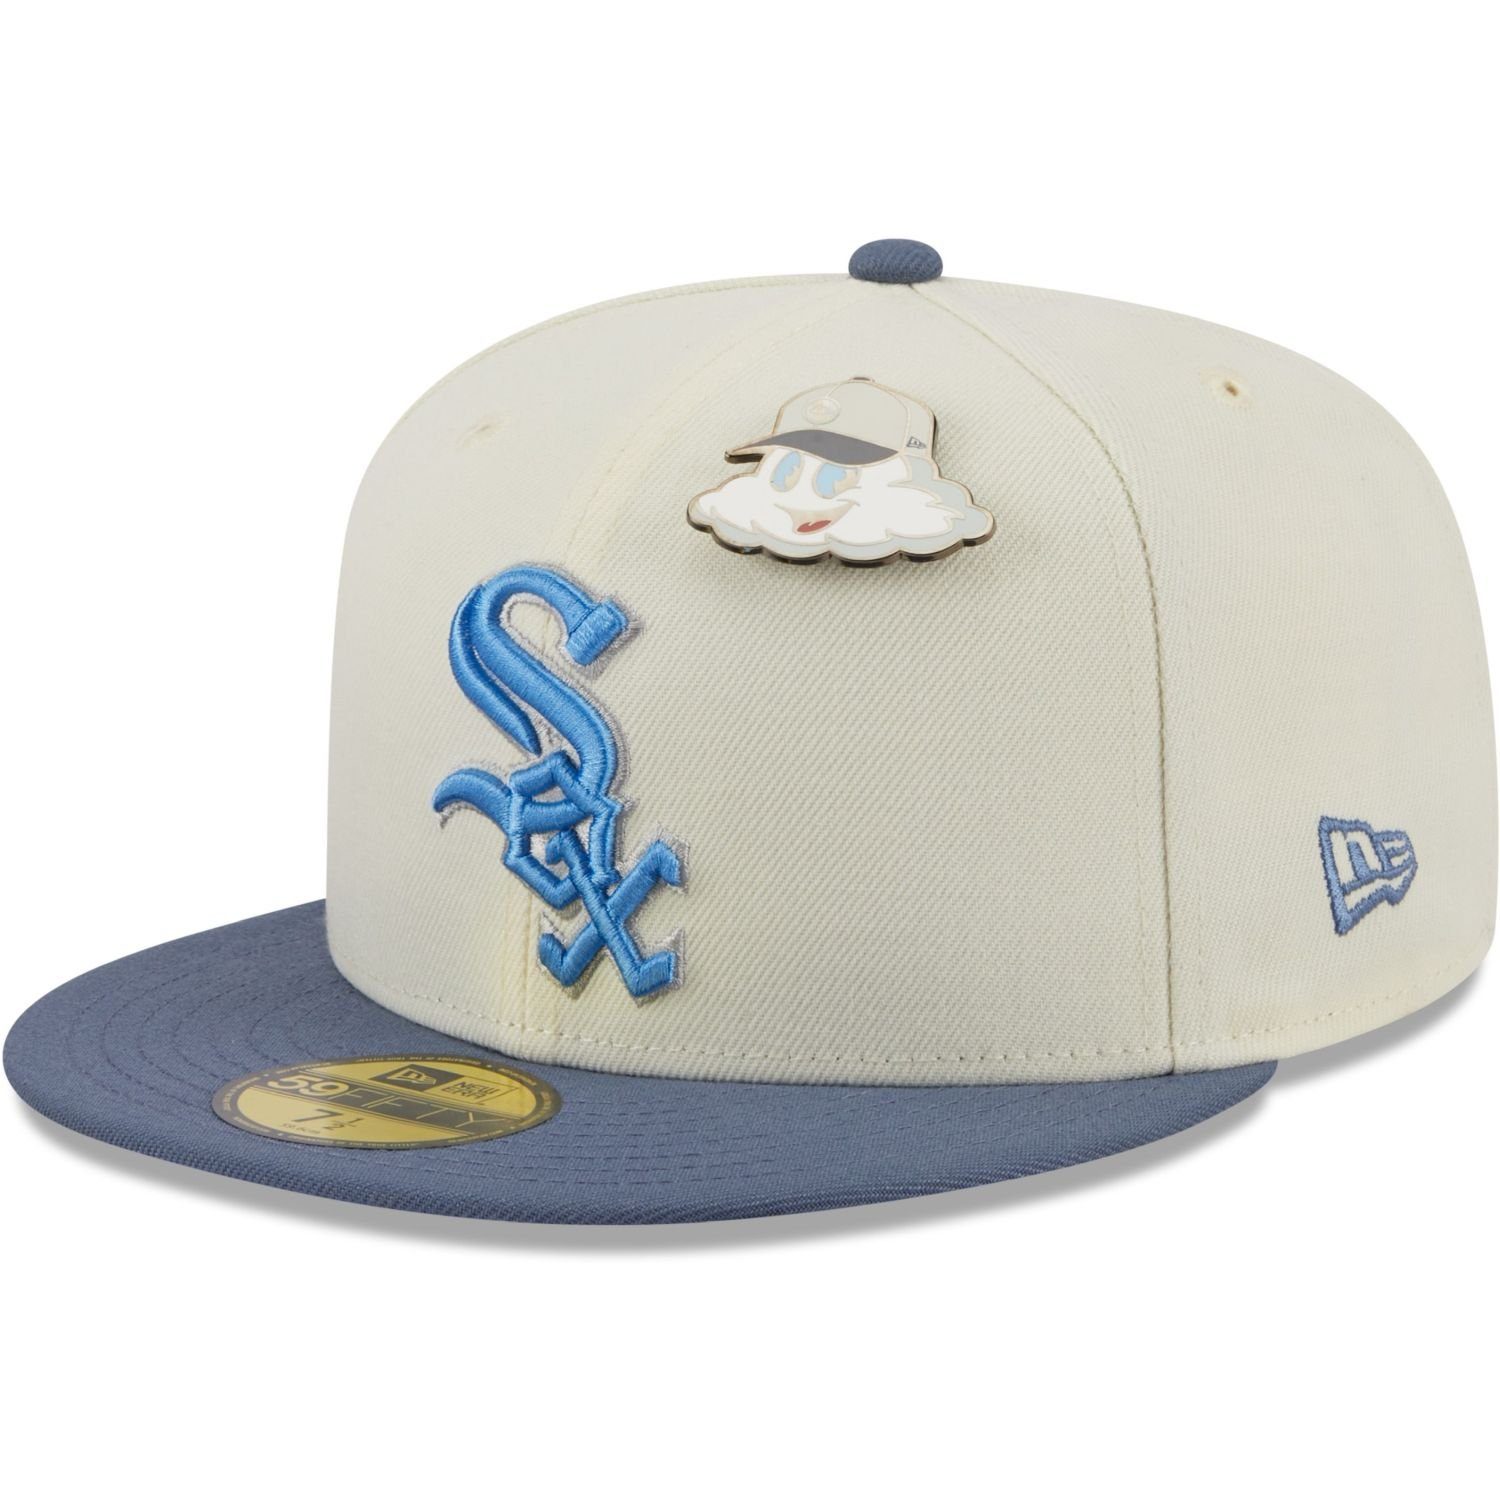 New Era Fitted Cap 59Fifty ELEMENTS PIN Chicago White Sox